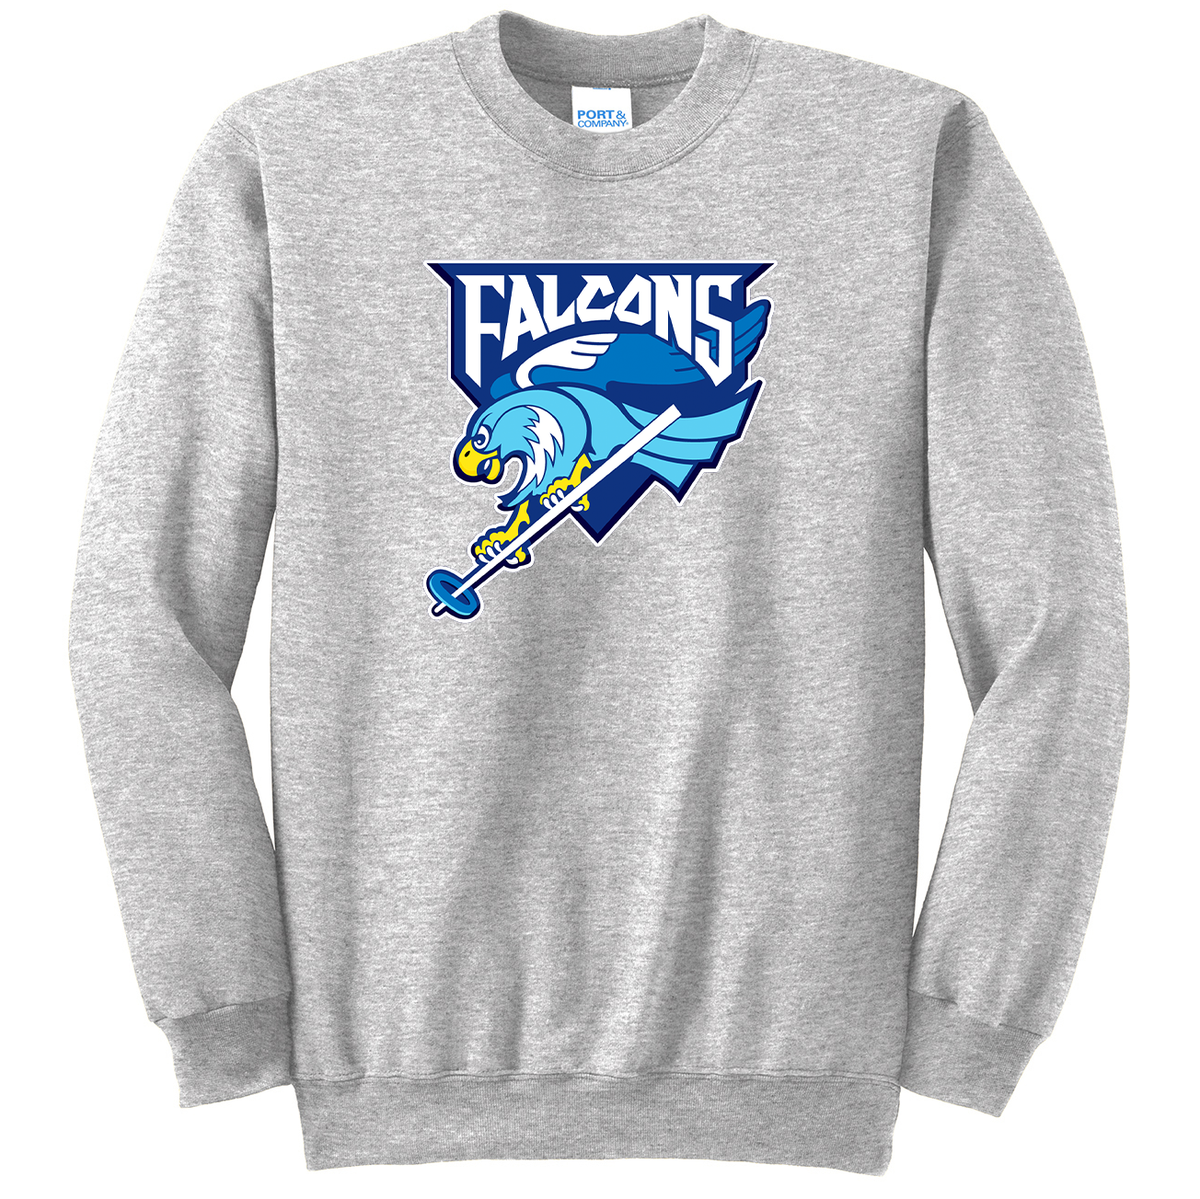 Falcons Ringettes Crew Neck Sweater